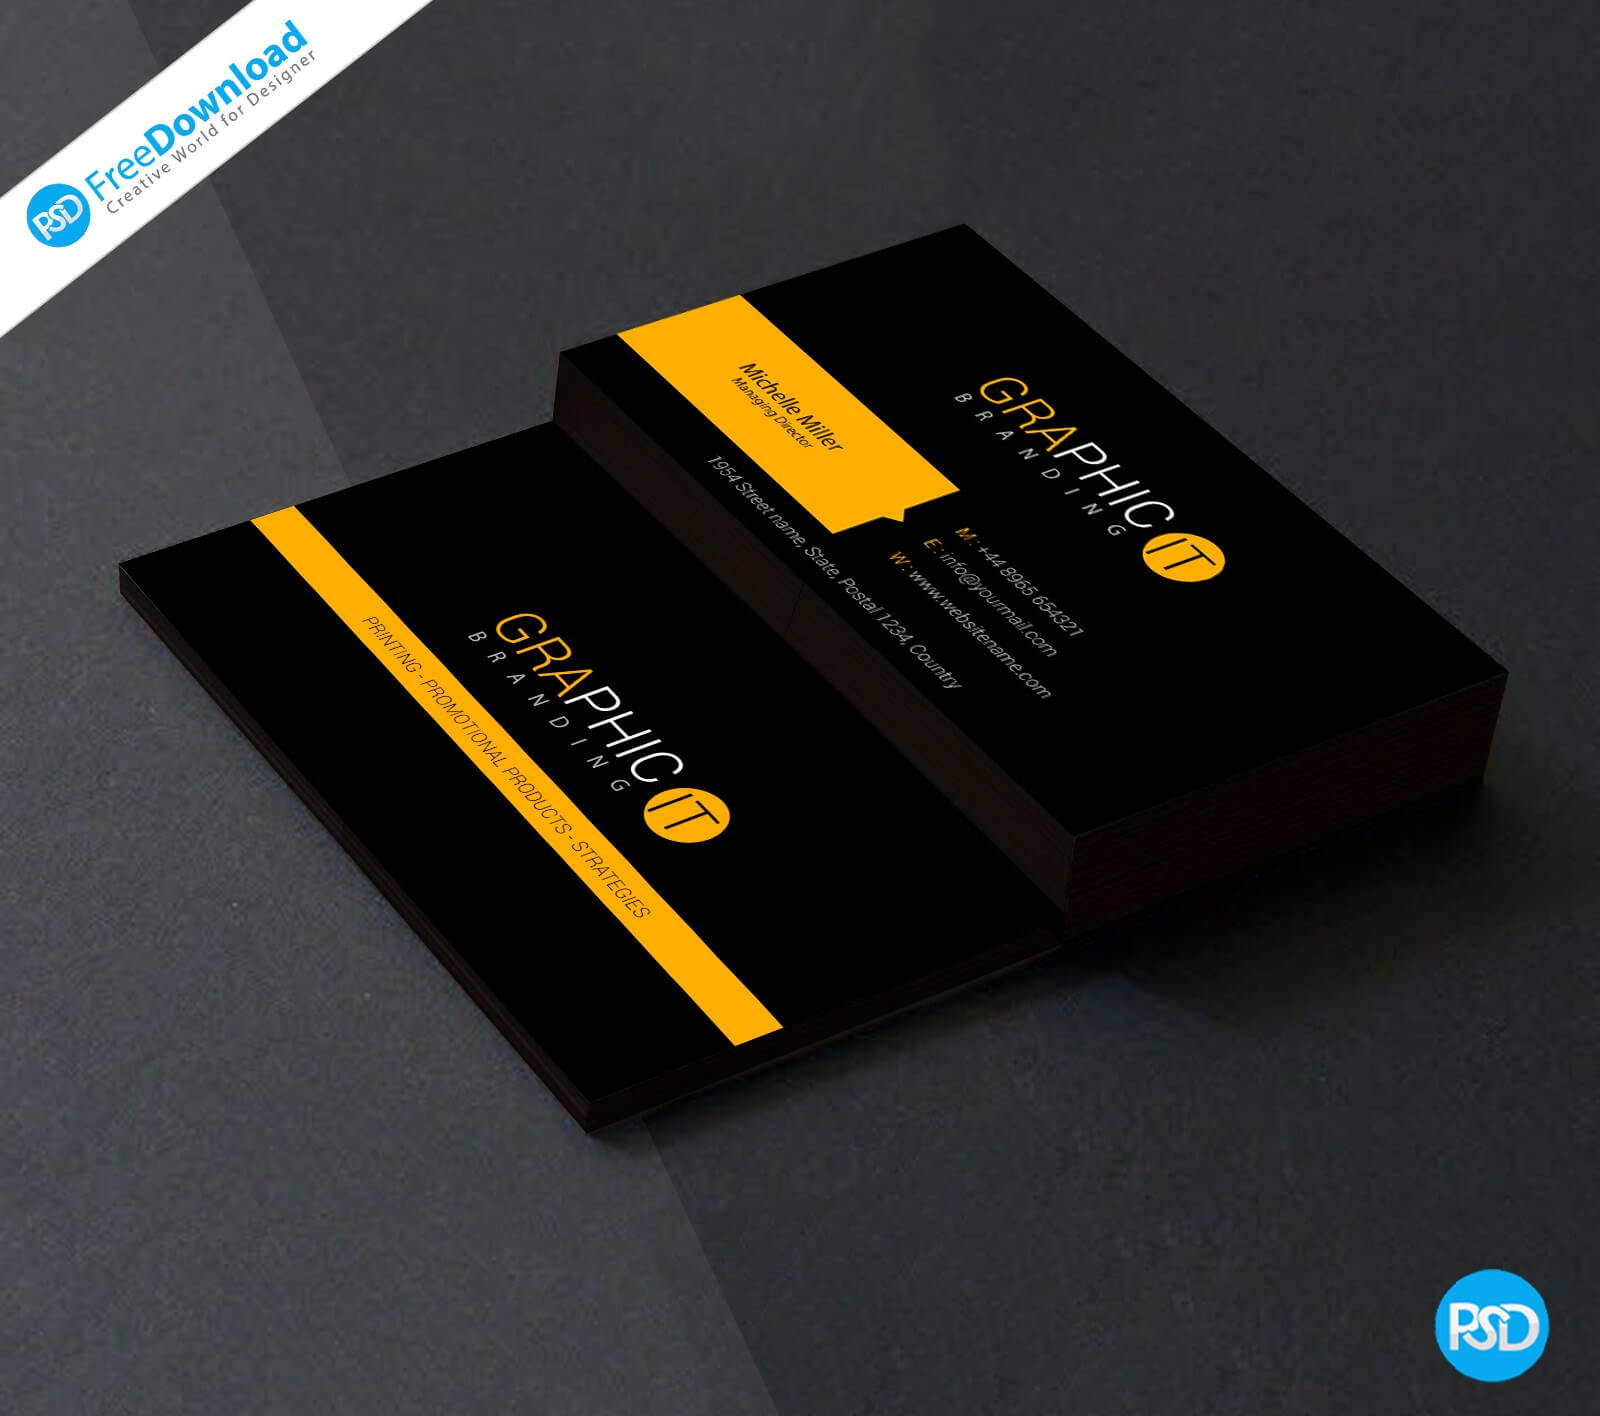 009 Template Ideas Professional Business Card Design Psd Intended For Professional Business Card Templates Free Download